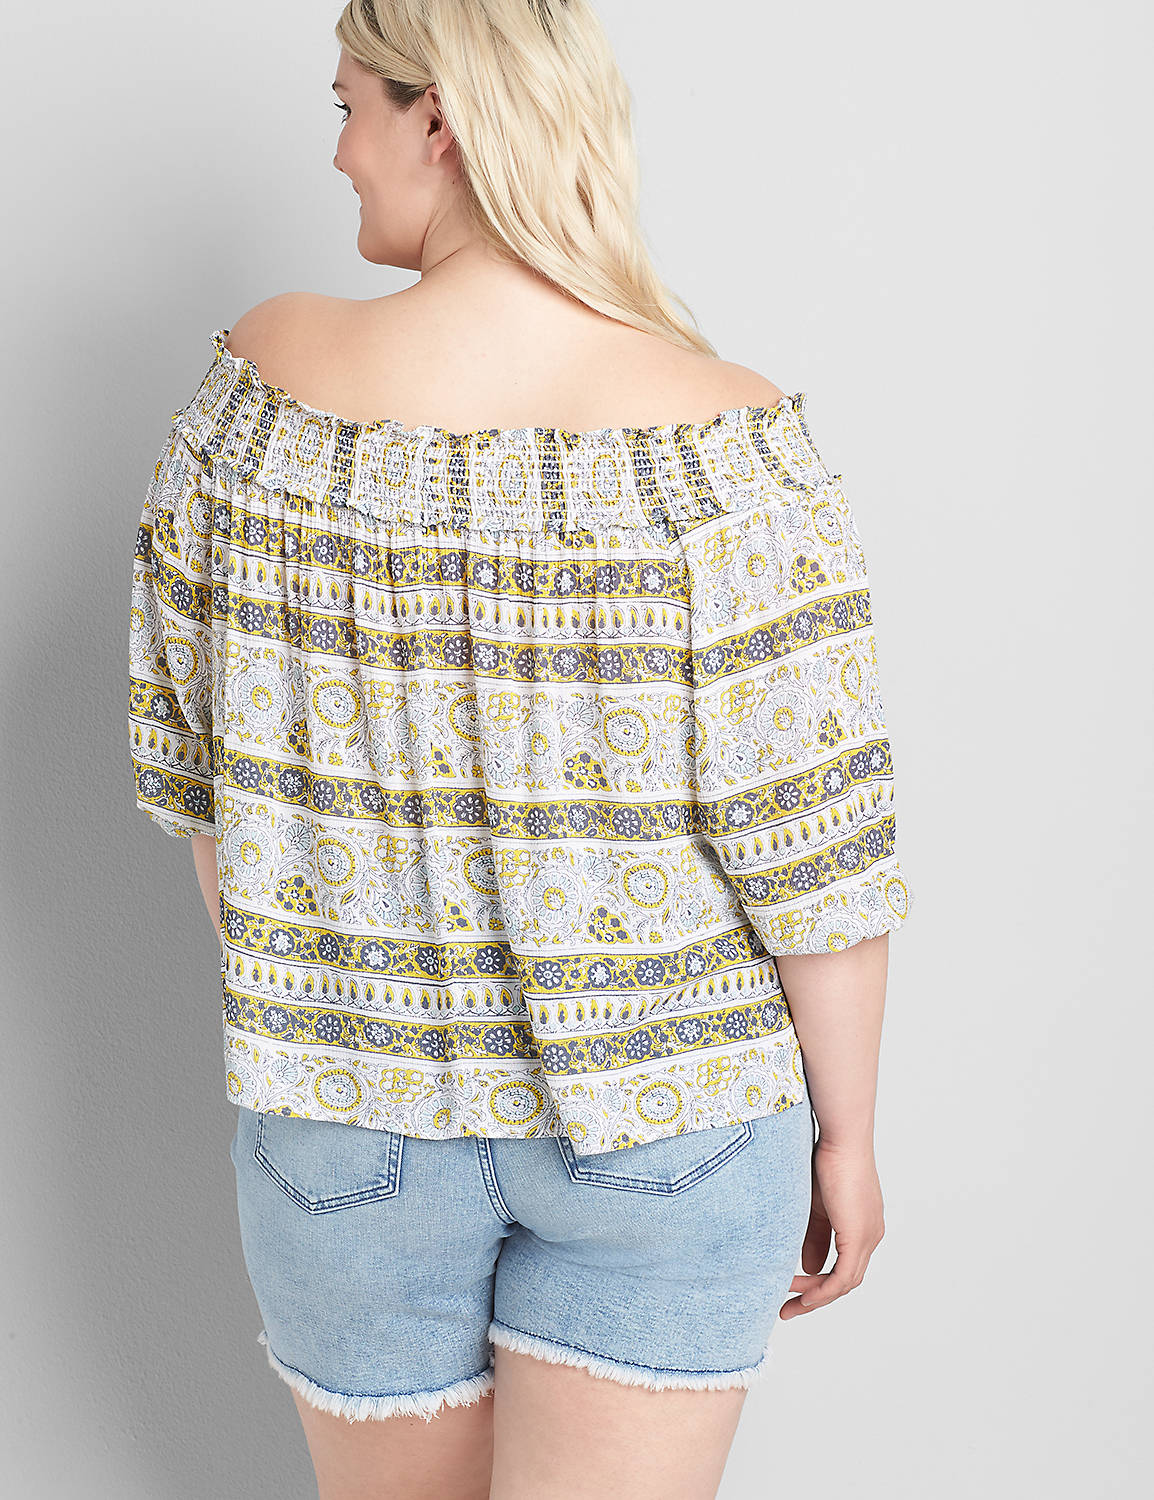 3/4 Sleeve Off-the-Shoulder Top Product Image 2